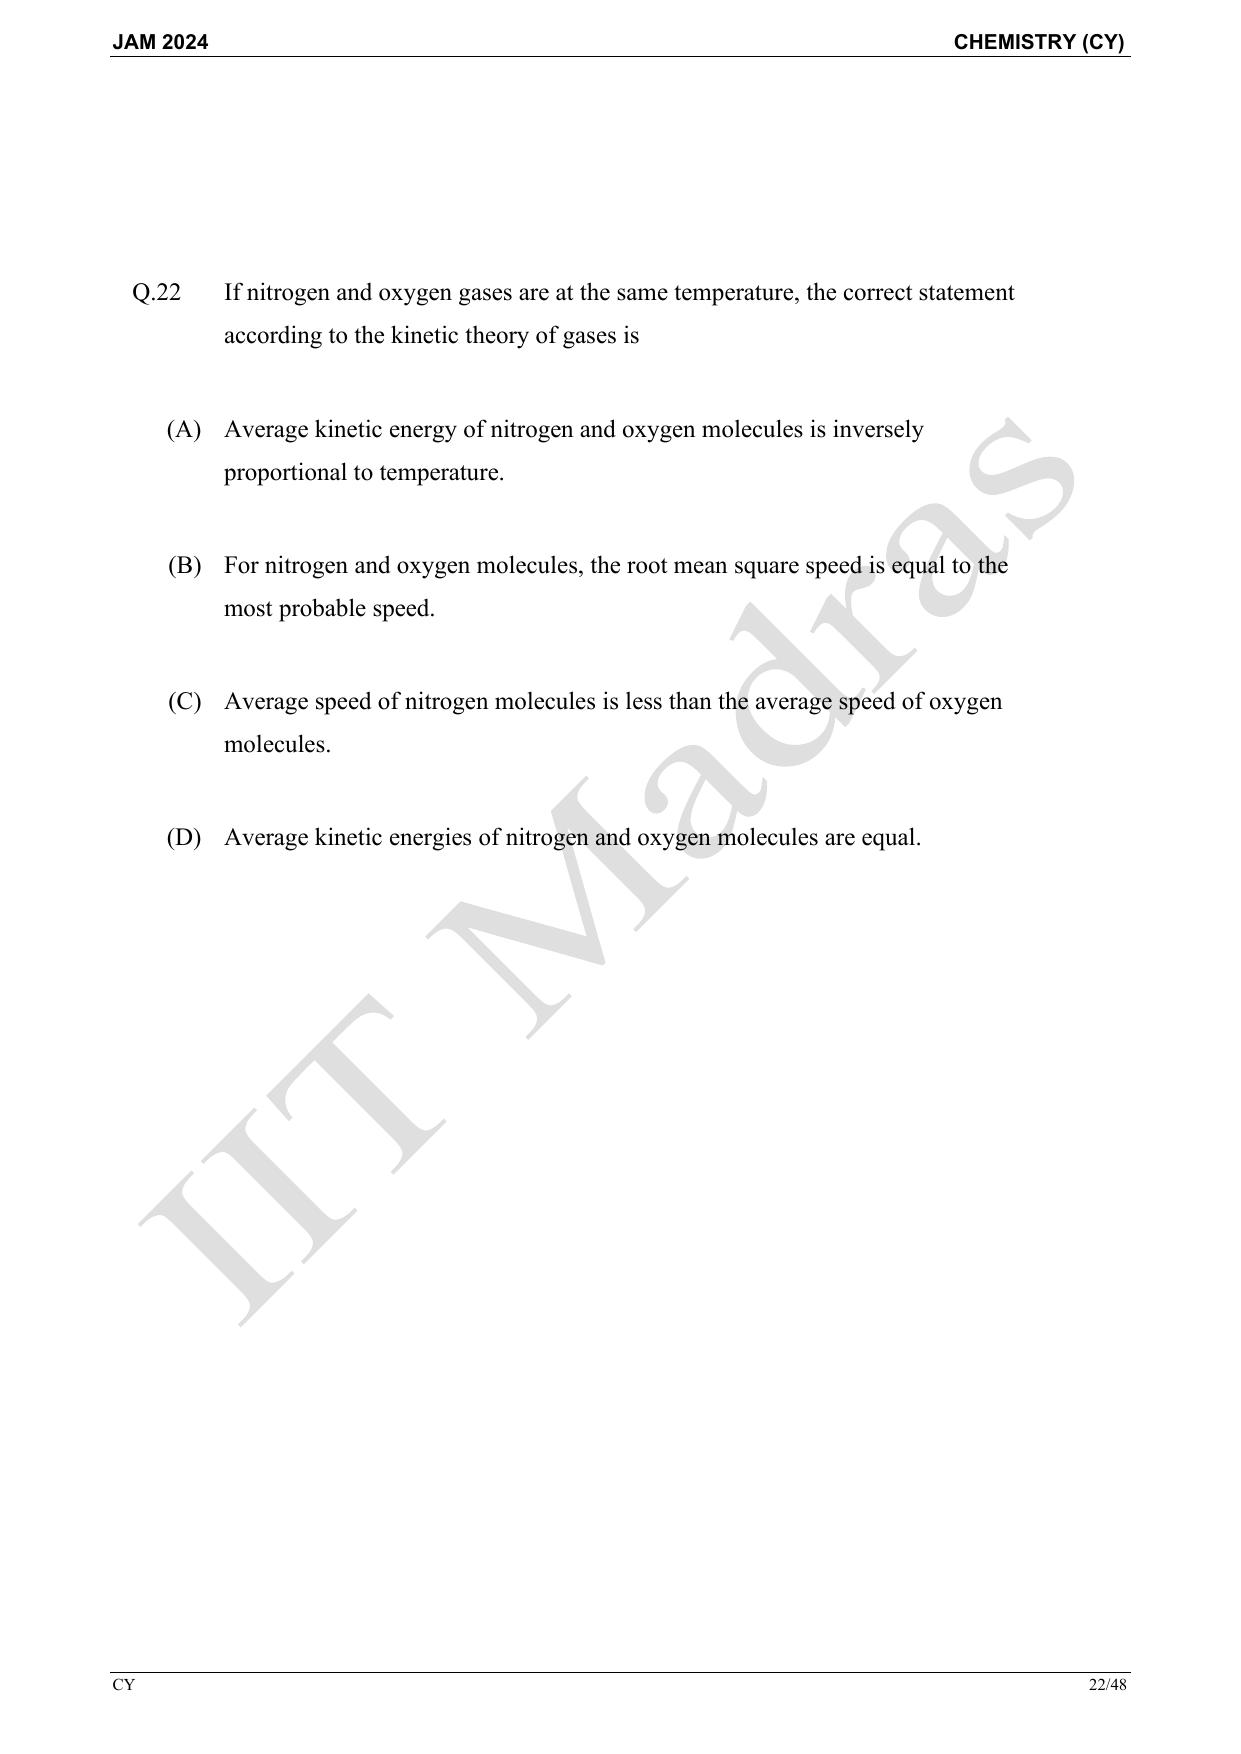 IIT JAM 2024 Chemistry (CY) Master Question Paper - Page 22